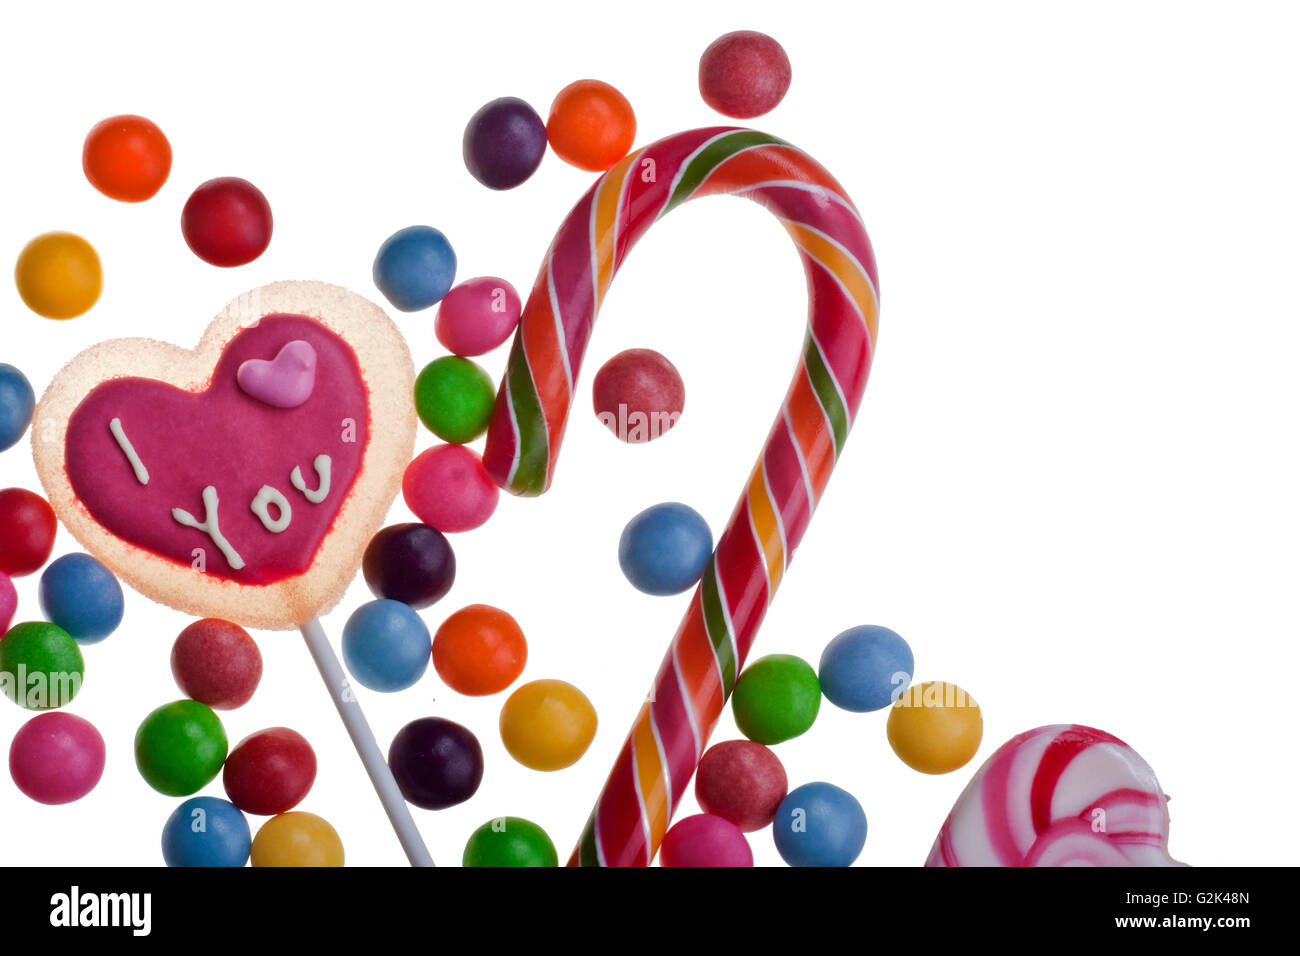 Lollipops and mixed colorful sweets Stock Photo